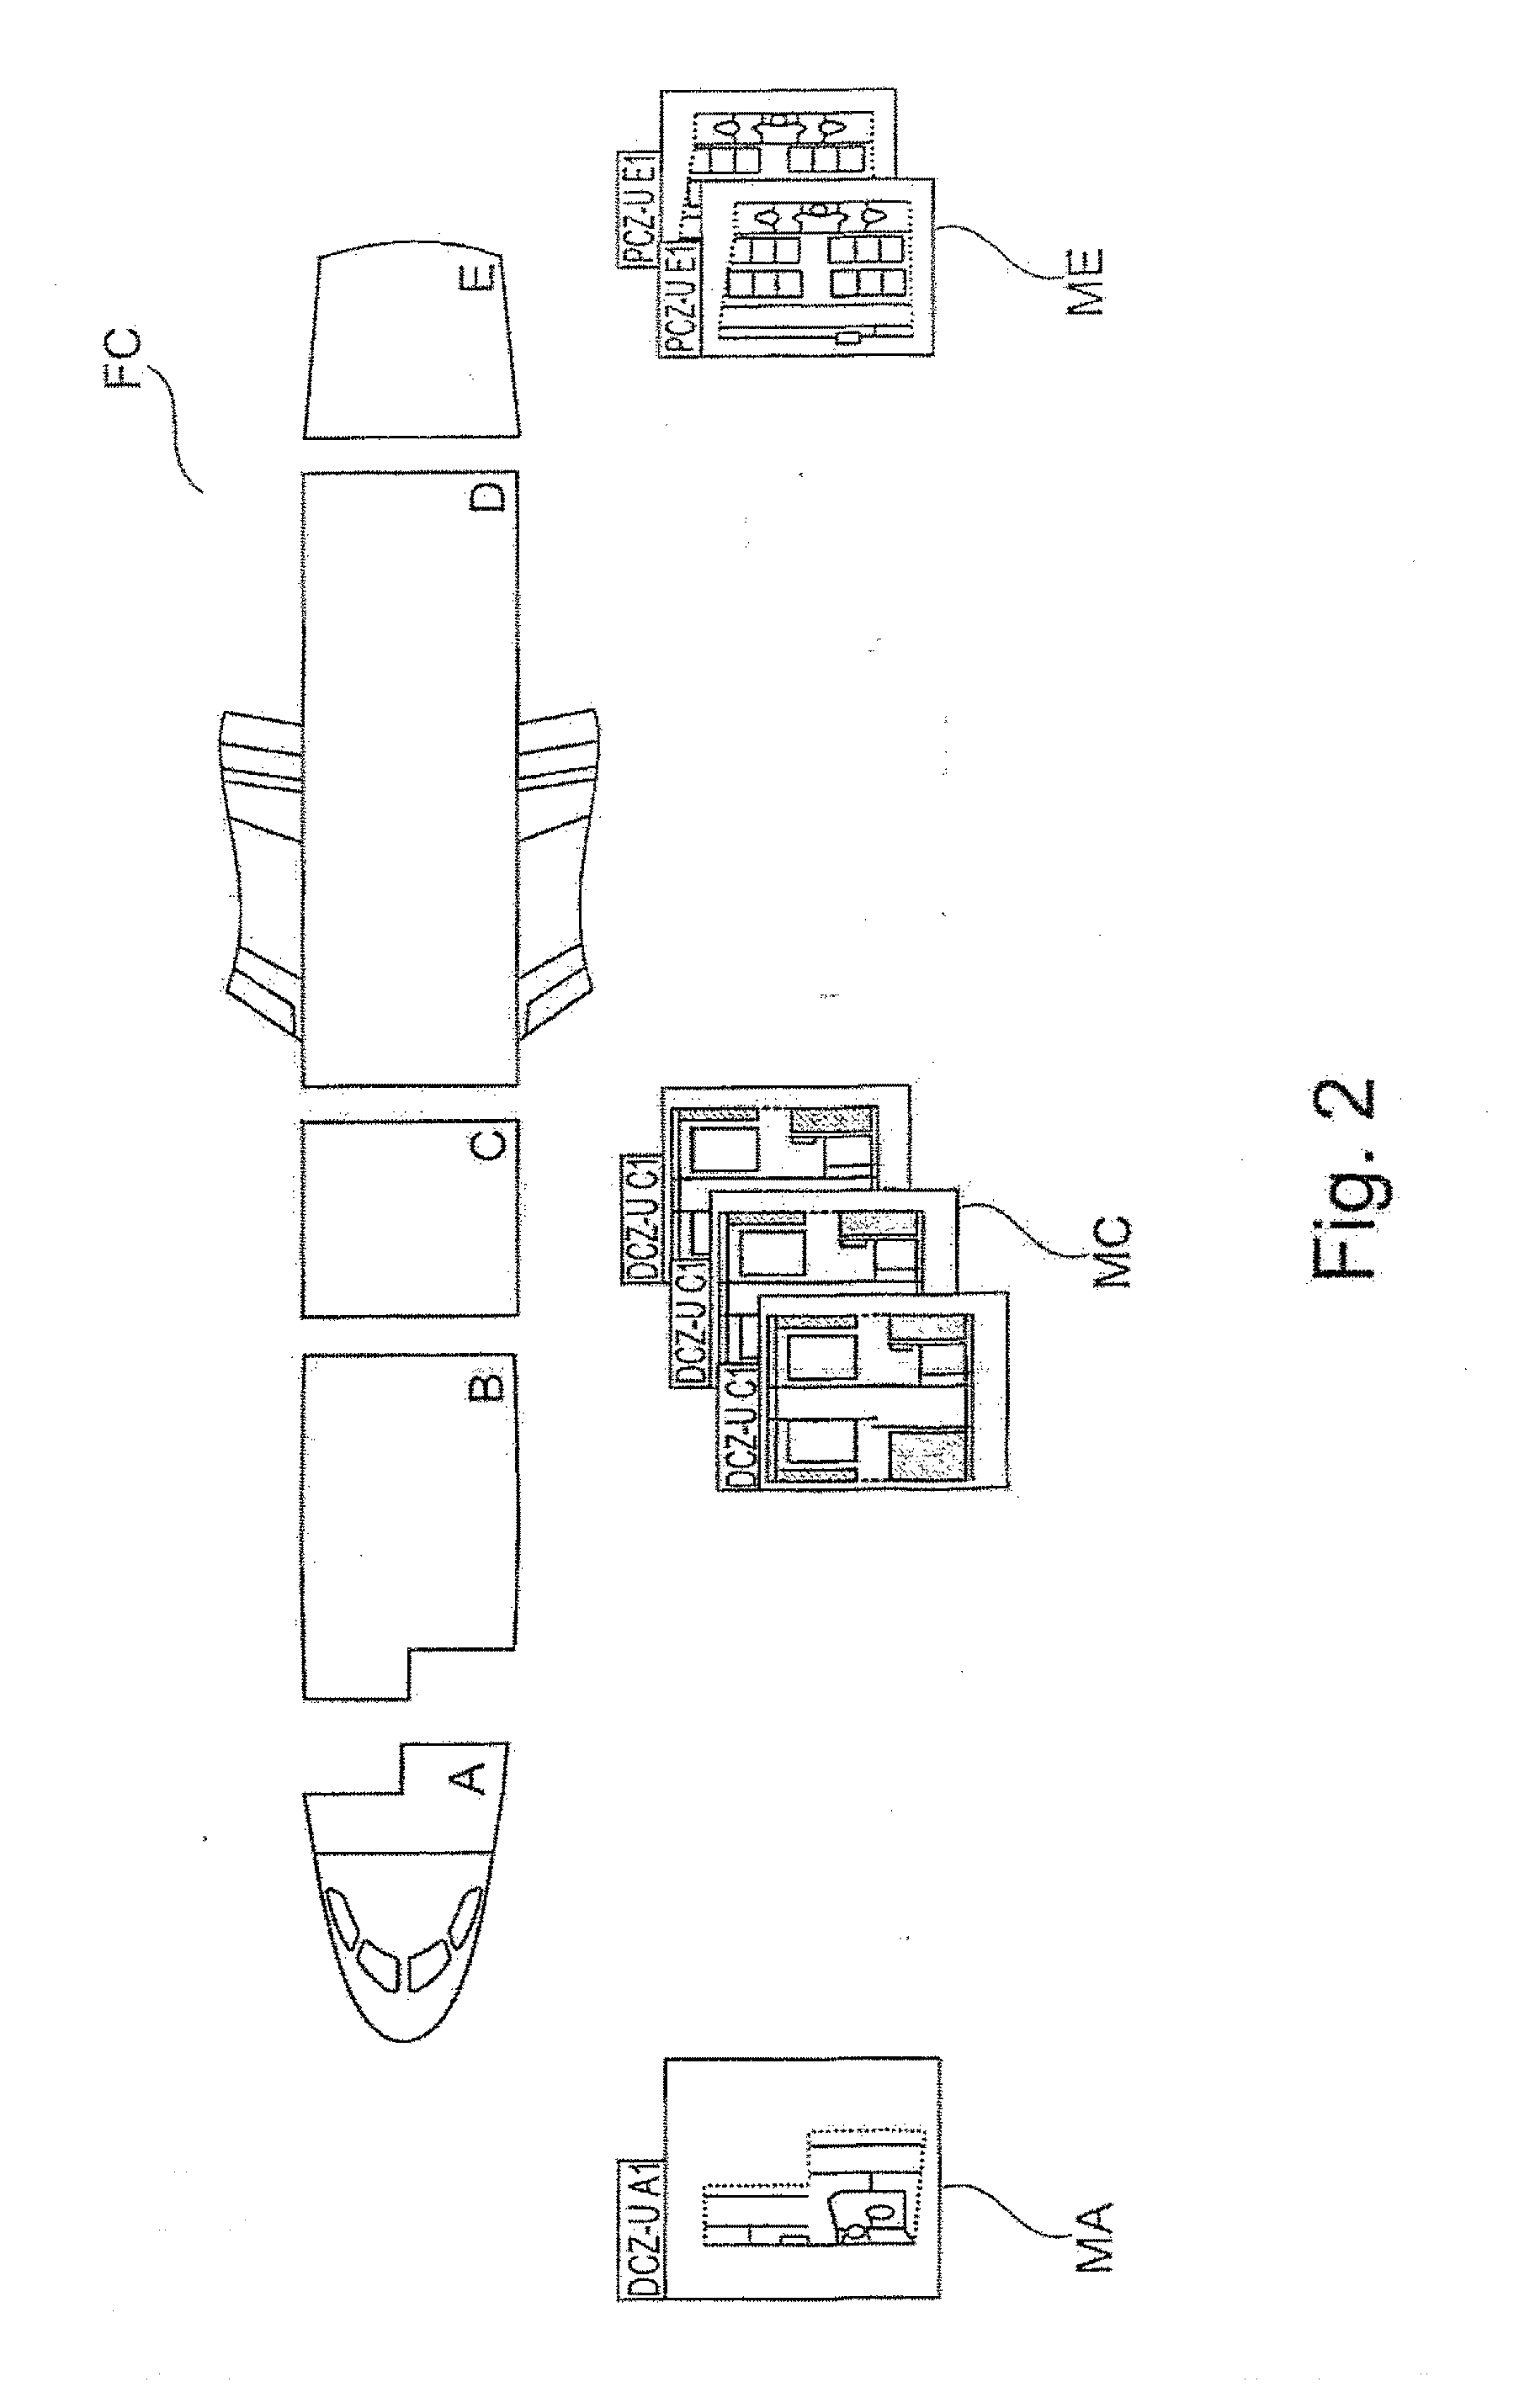 Method for configuration and/or equipment of a vehicle cabin, in particular of an aircraft